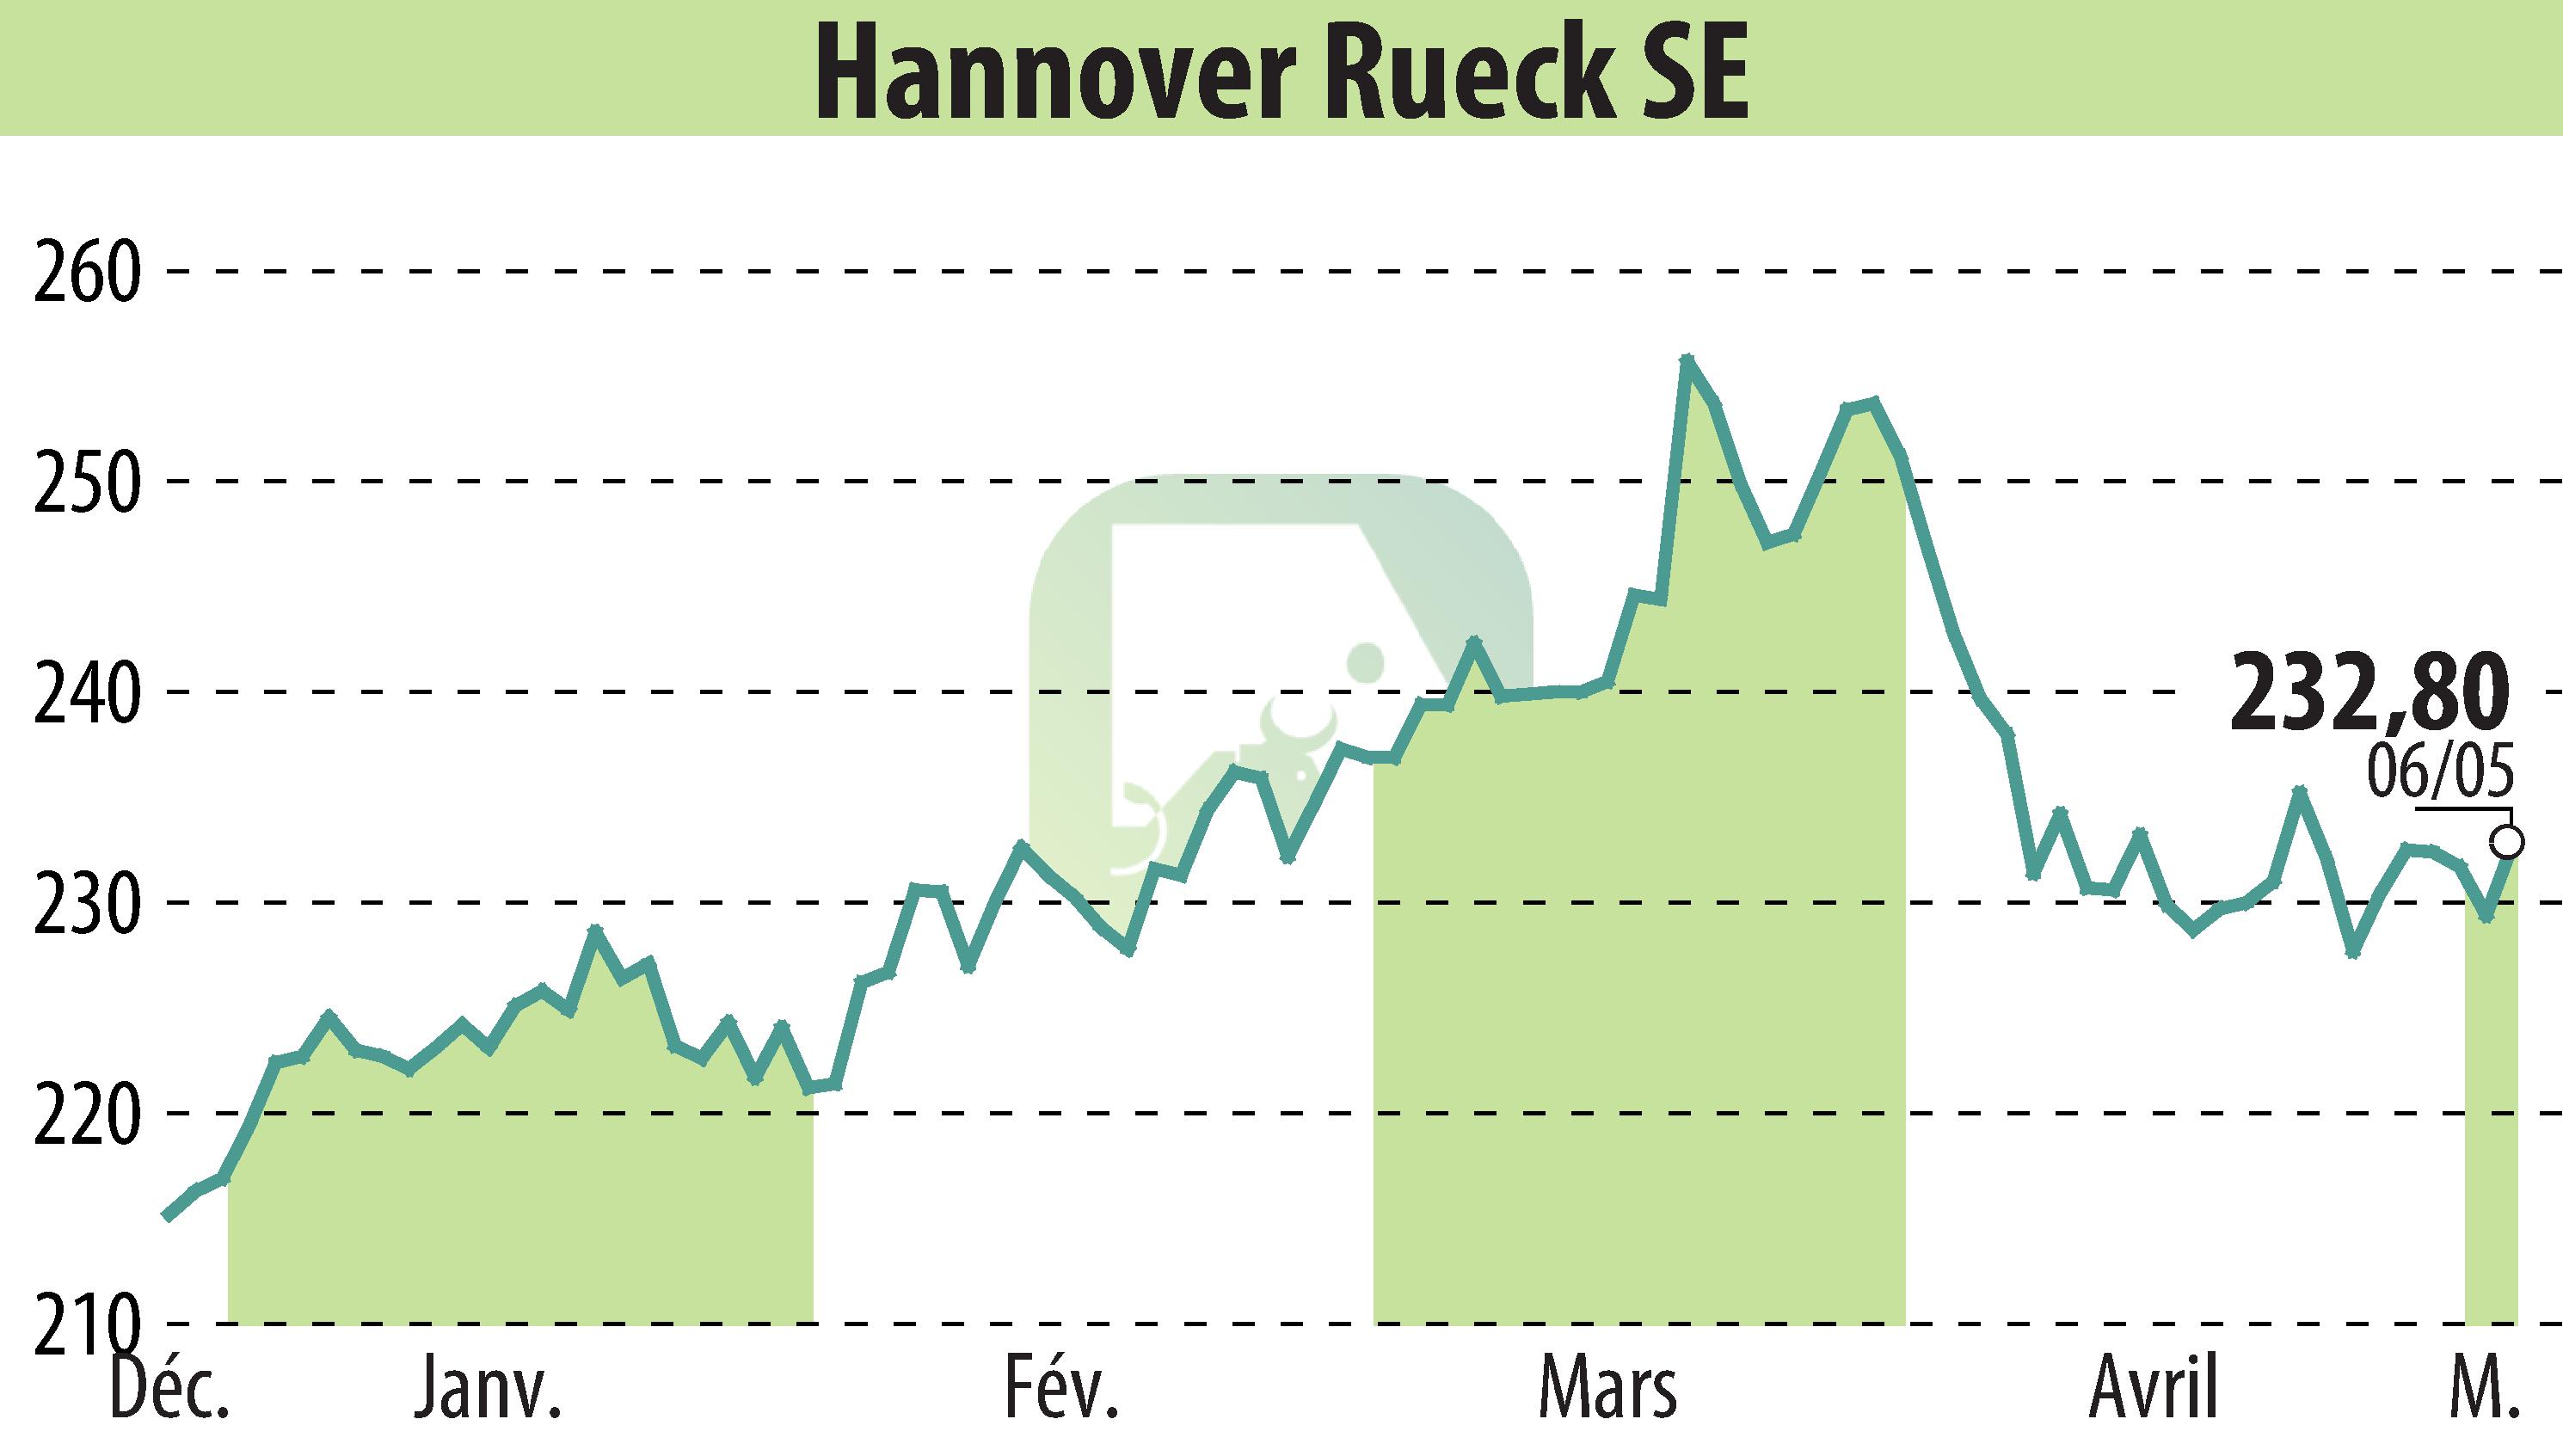 Stock price chart of Hannover Rück SE (EBR:HNR1) showing fluctuations.